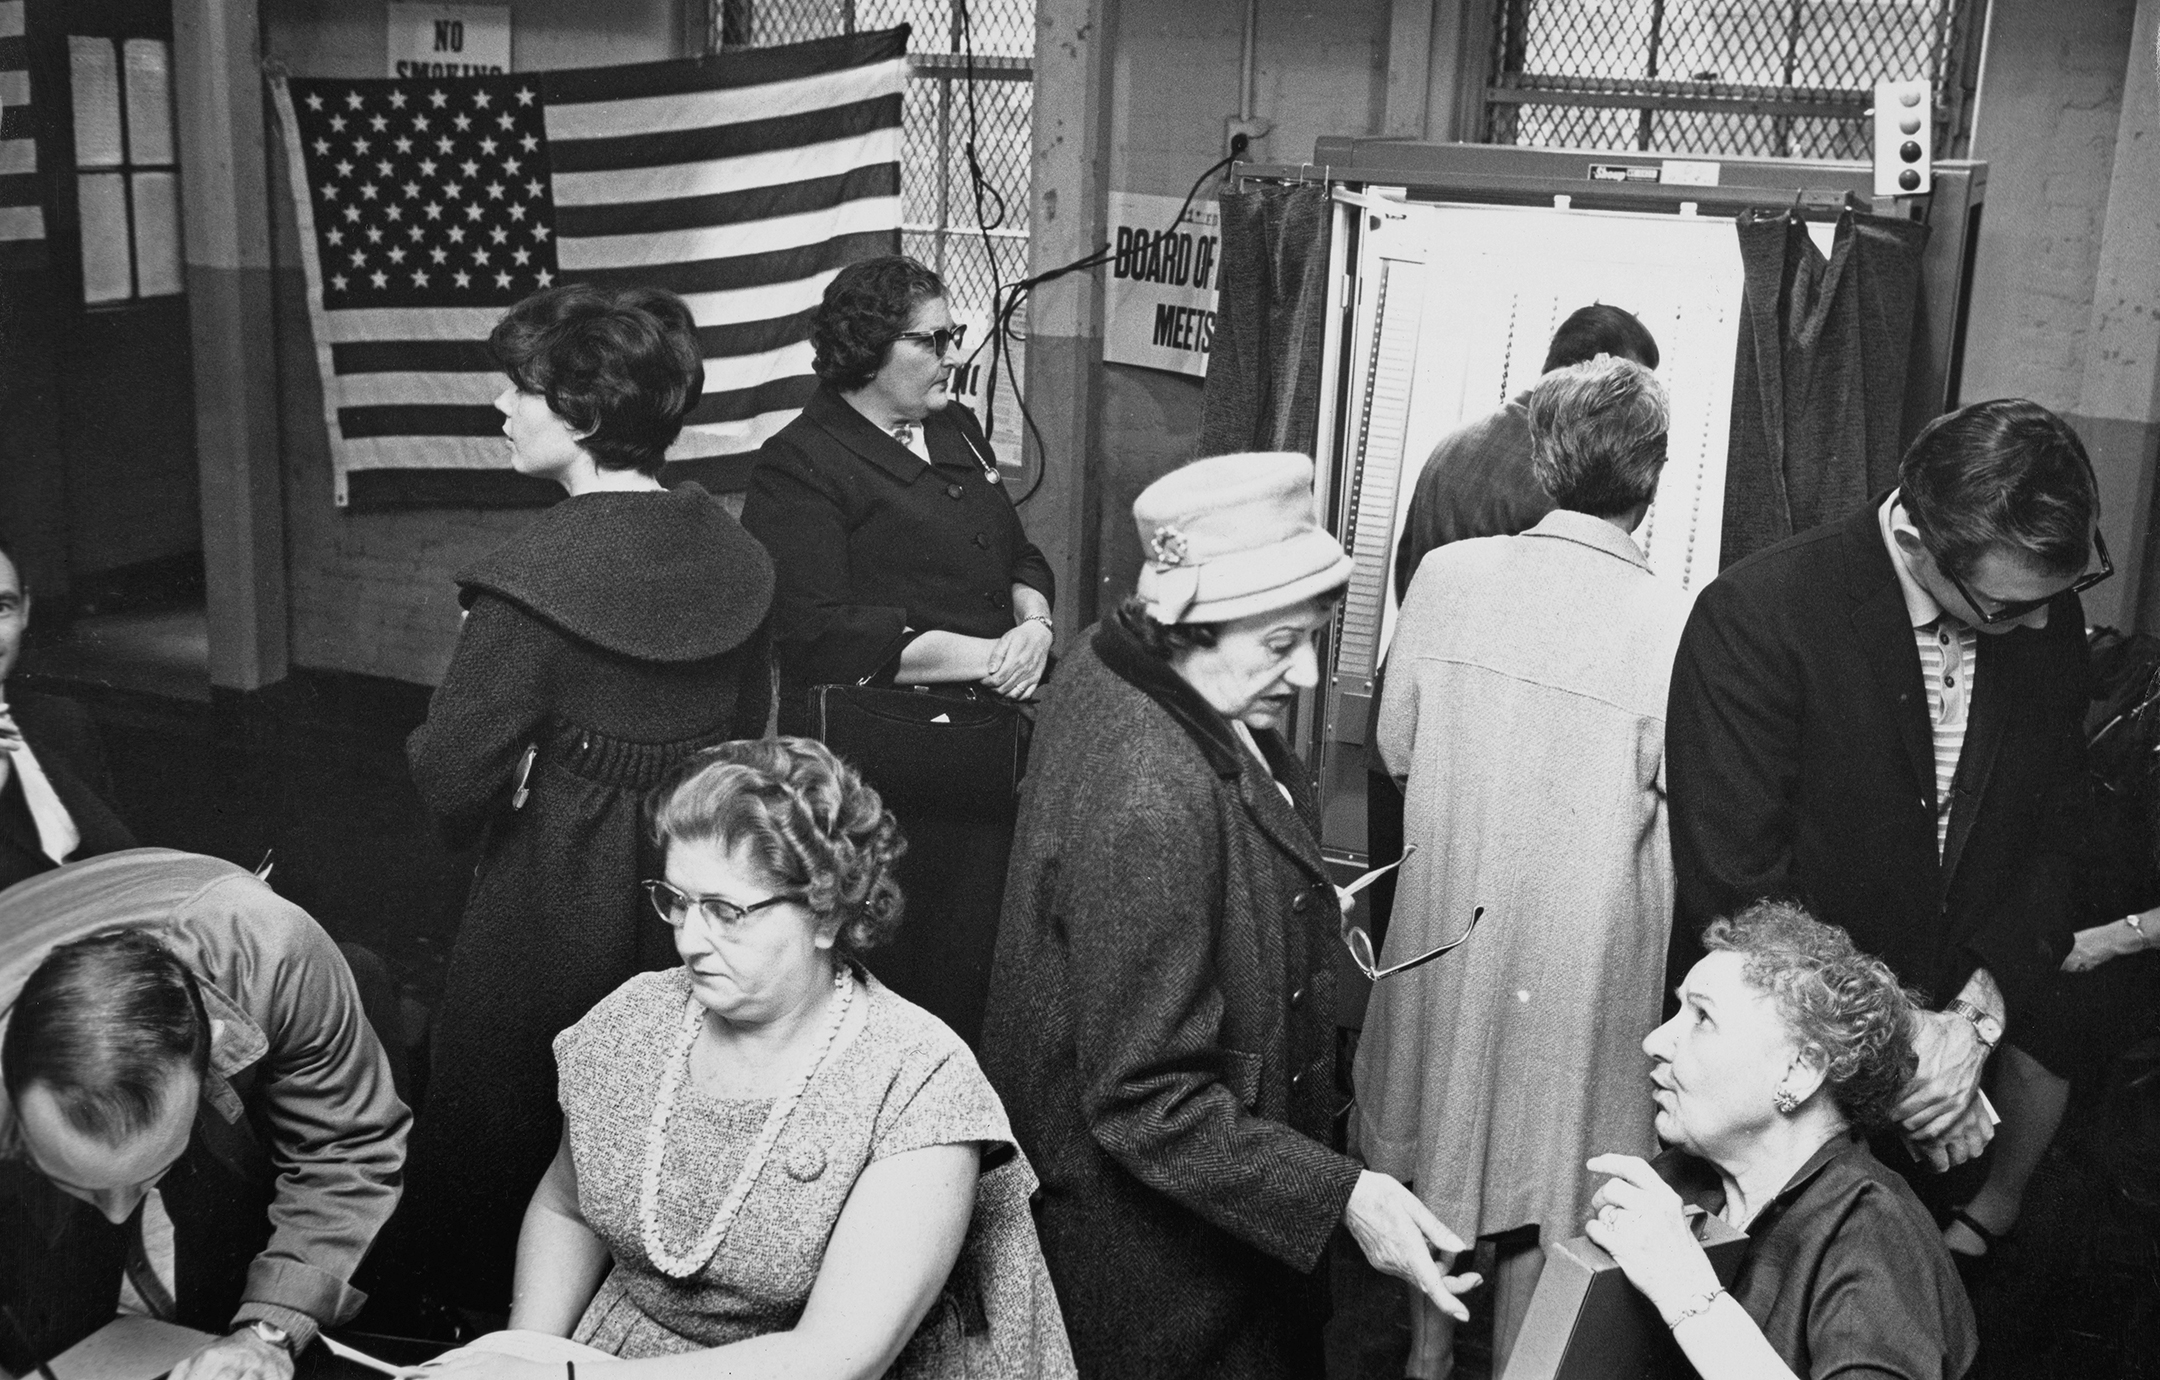 Black and white photo of 9 people, men and women, milling around and voting in a polling place 